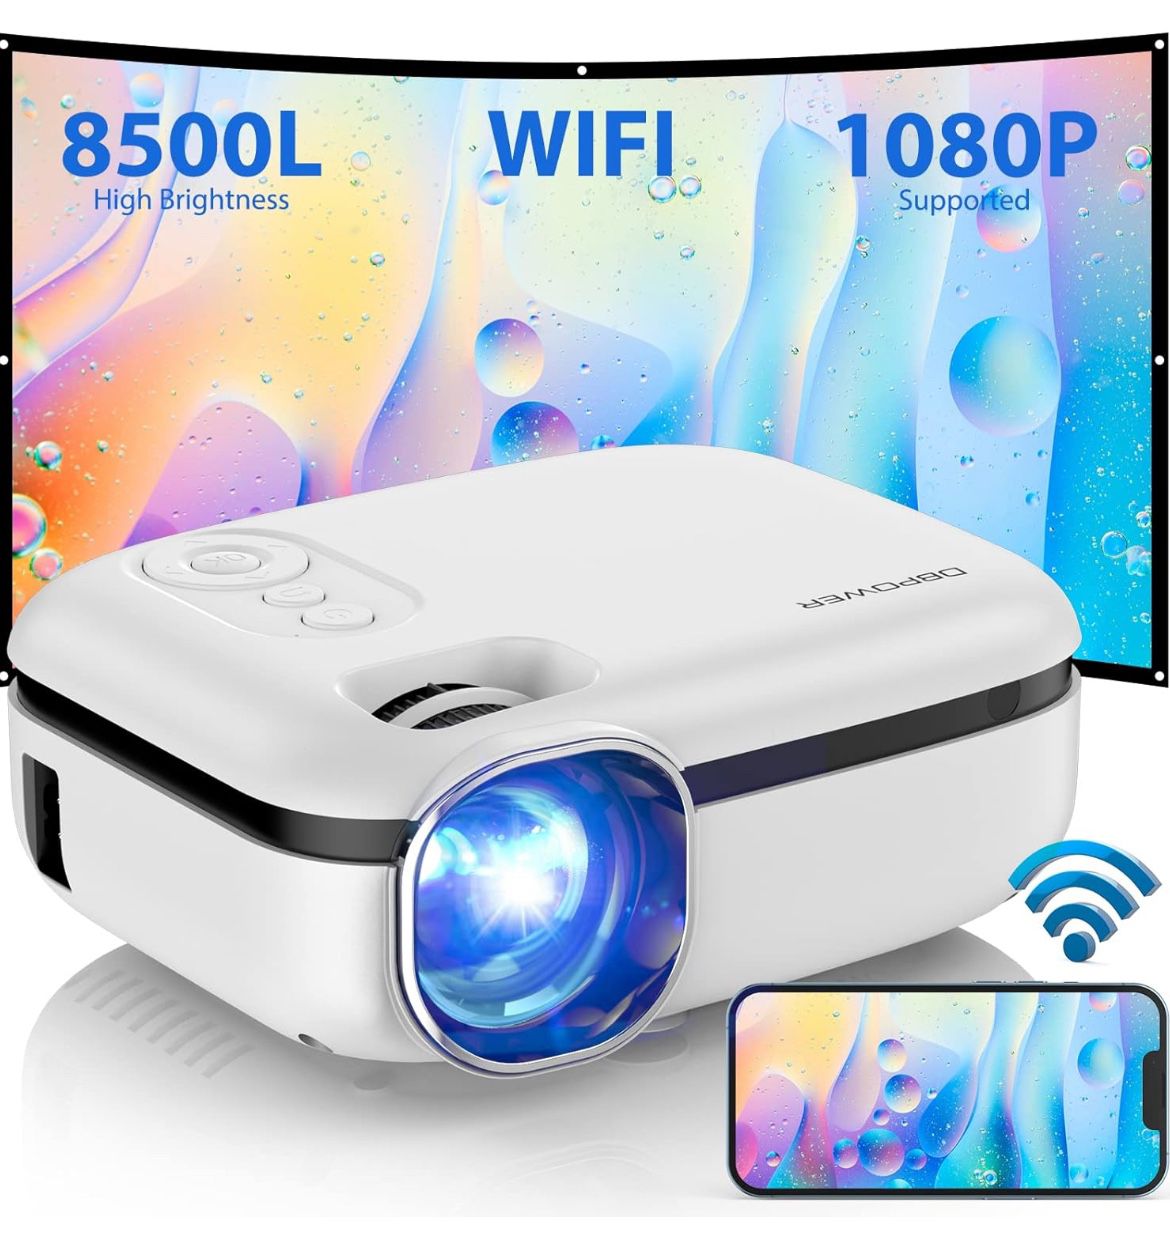 DBPOWER WiFi Mini Projector - New (never used)